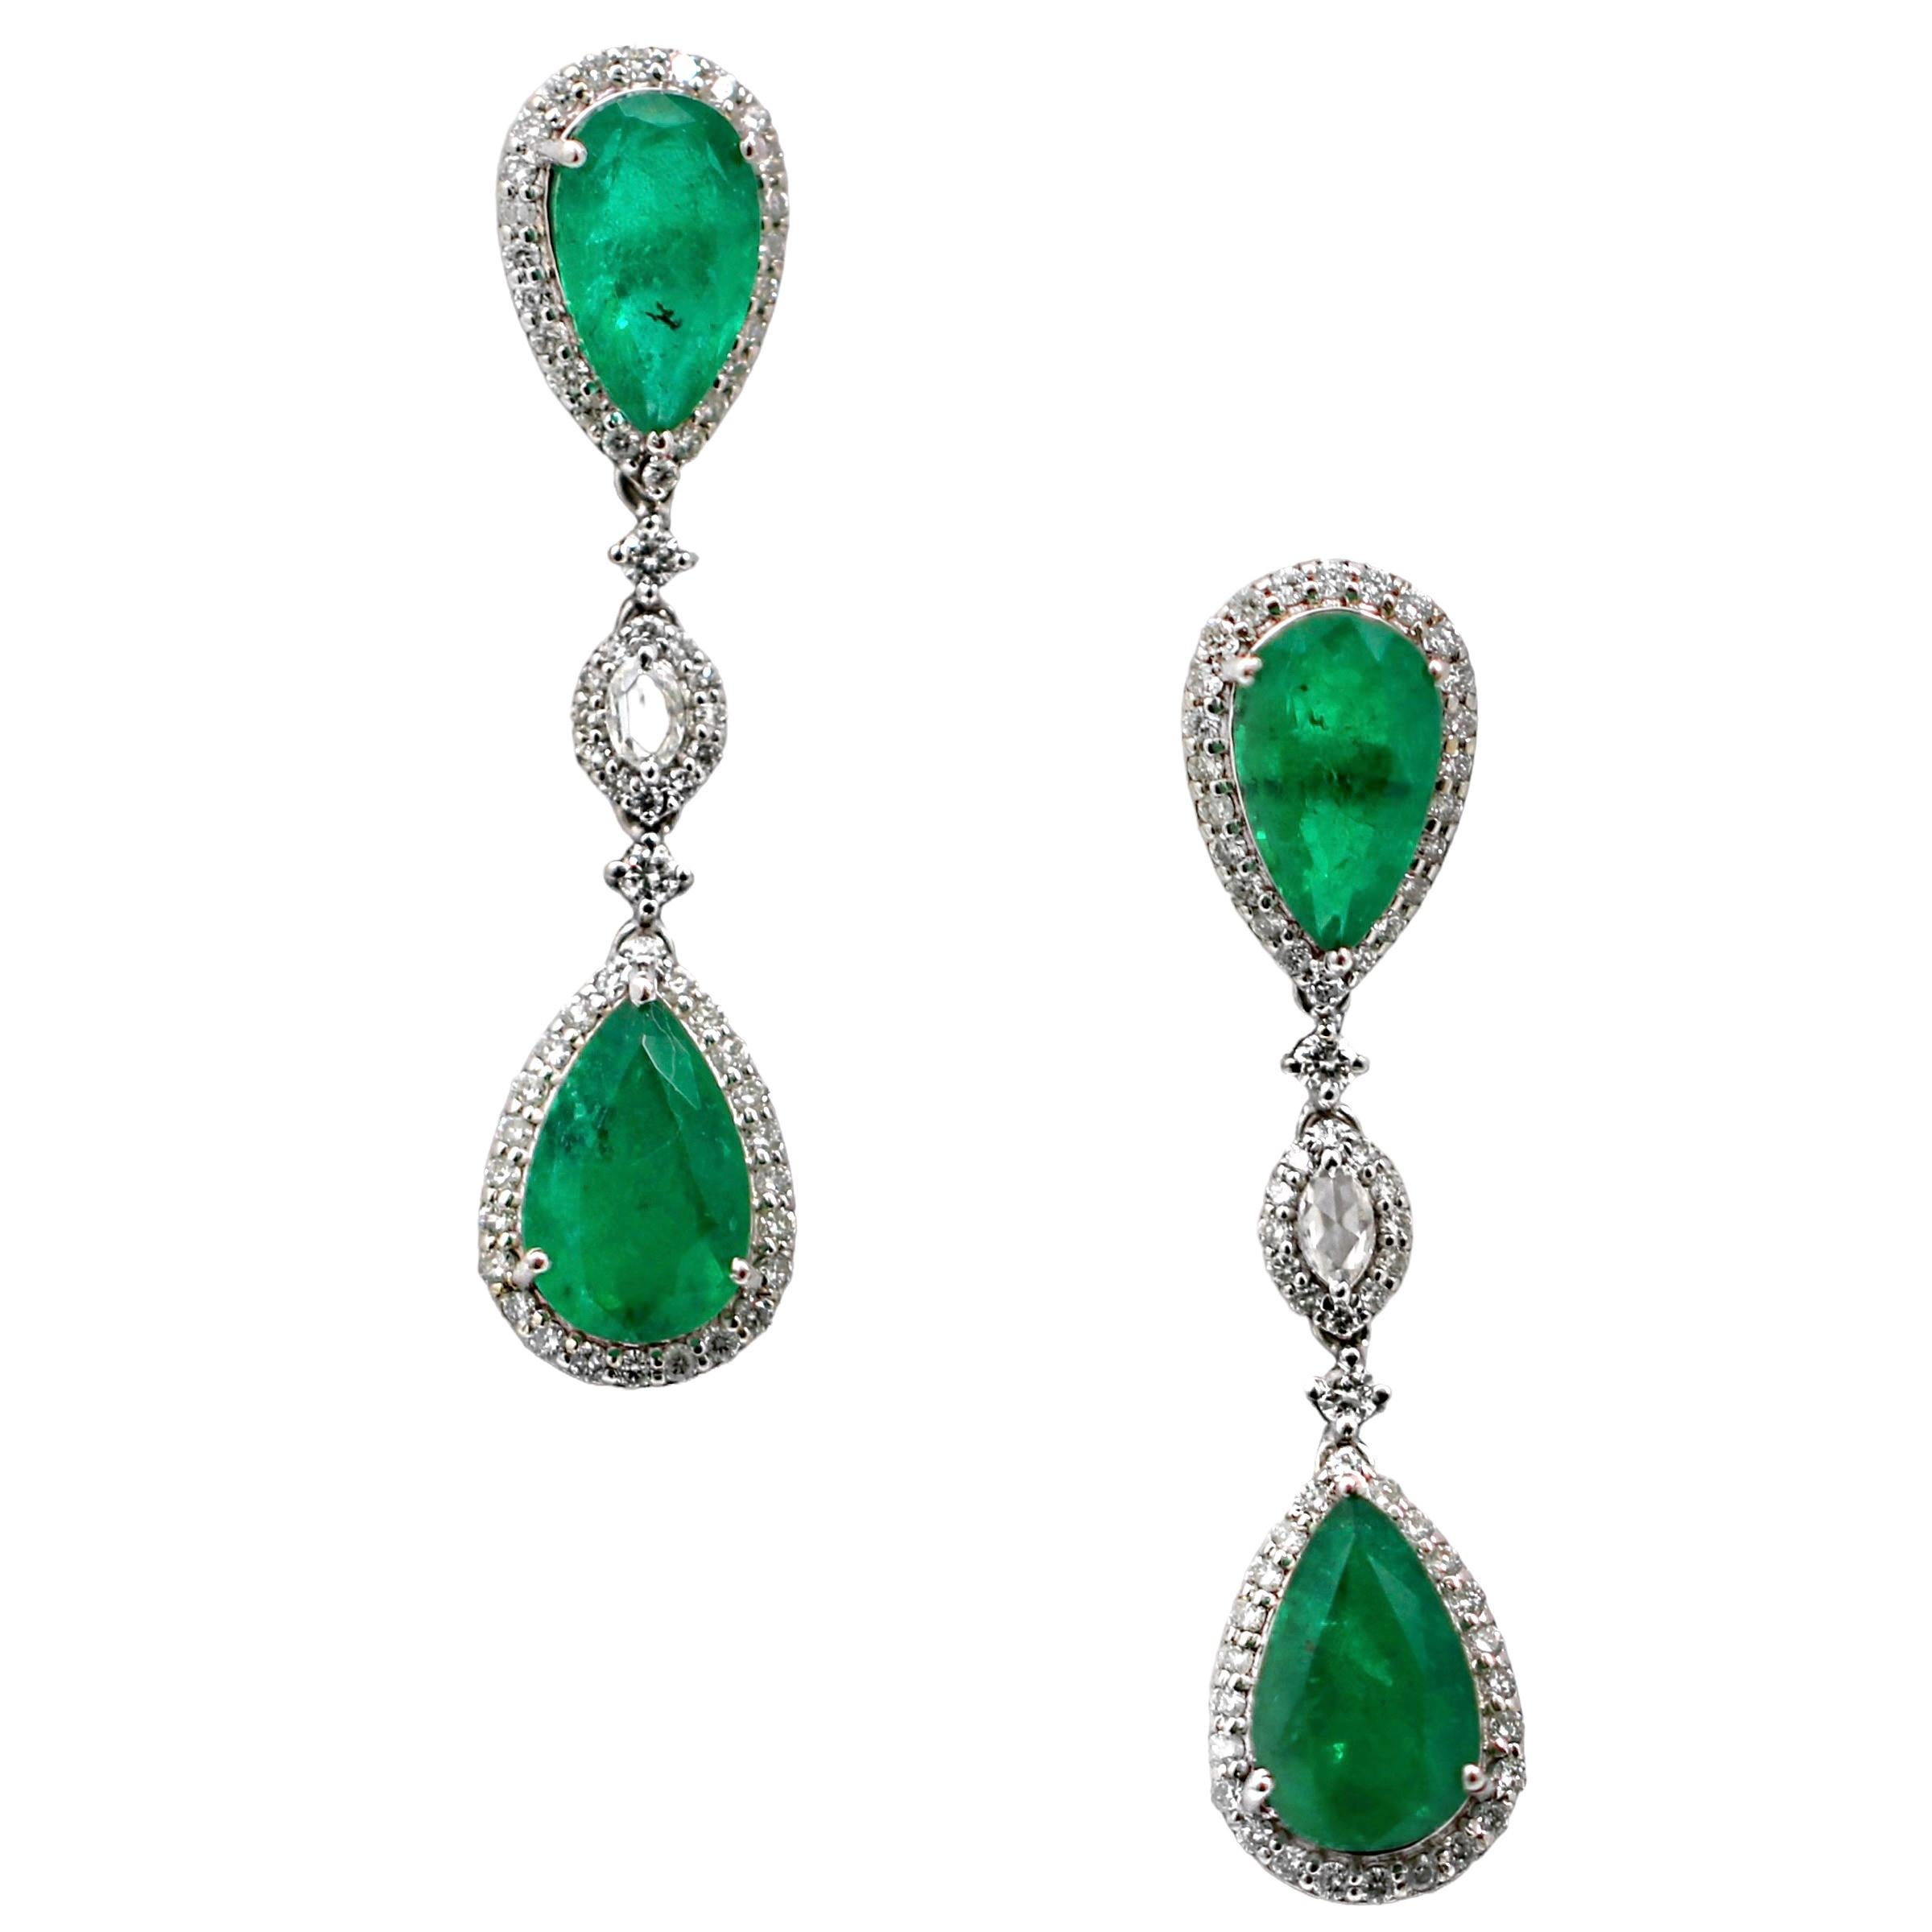 18k White Gold Pear Shaped Emerald and Diamond Drop Earrings